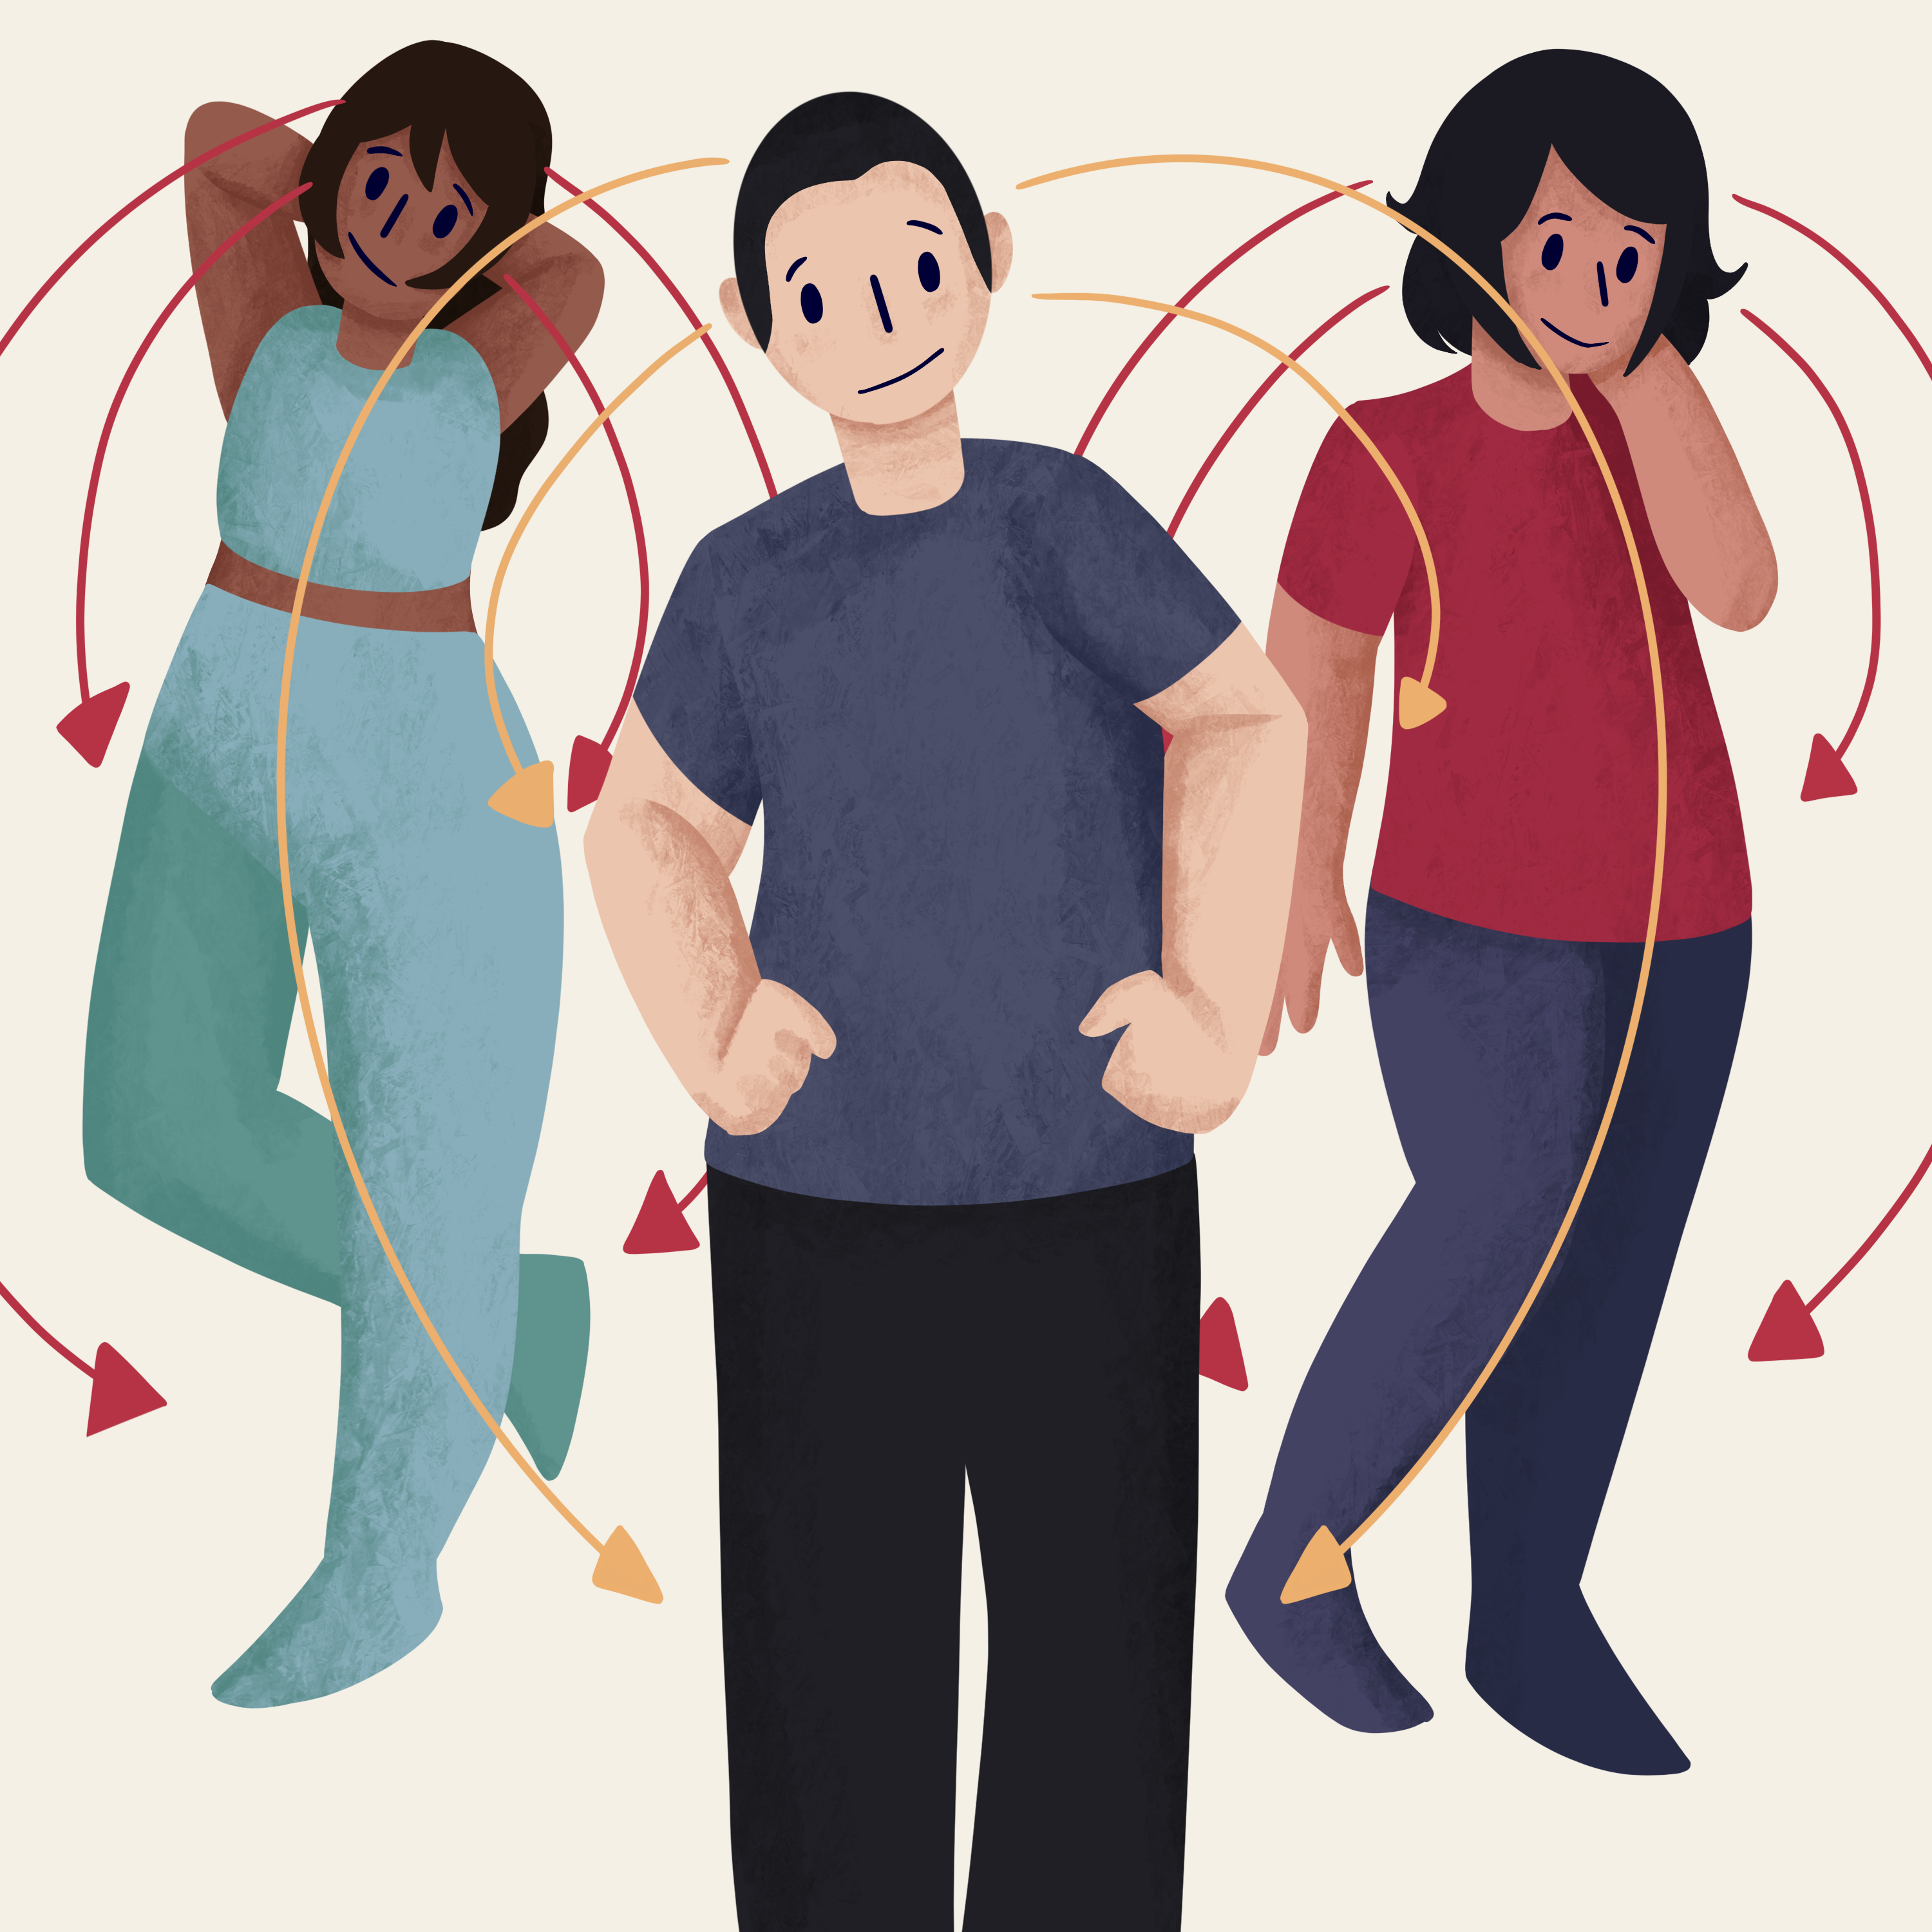 An illustration of three people showing that they feel good about using brain power to visualize healthy change.